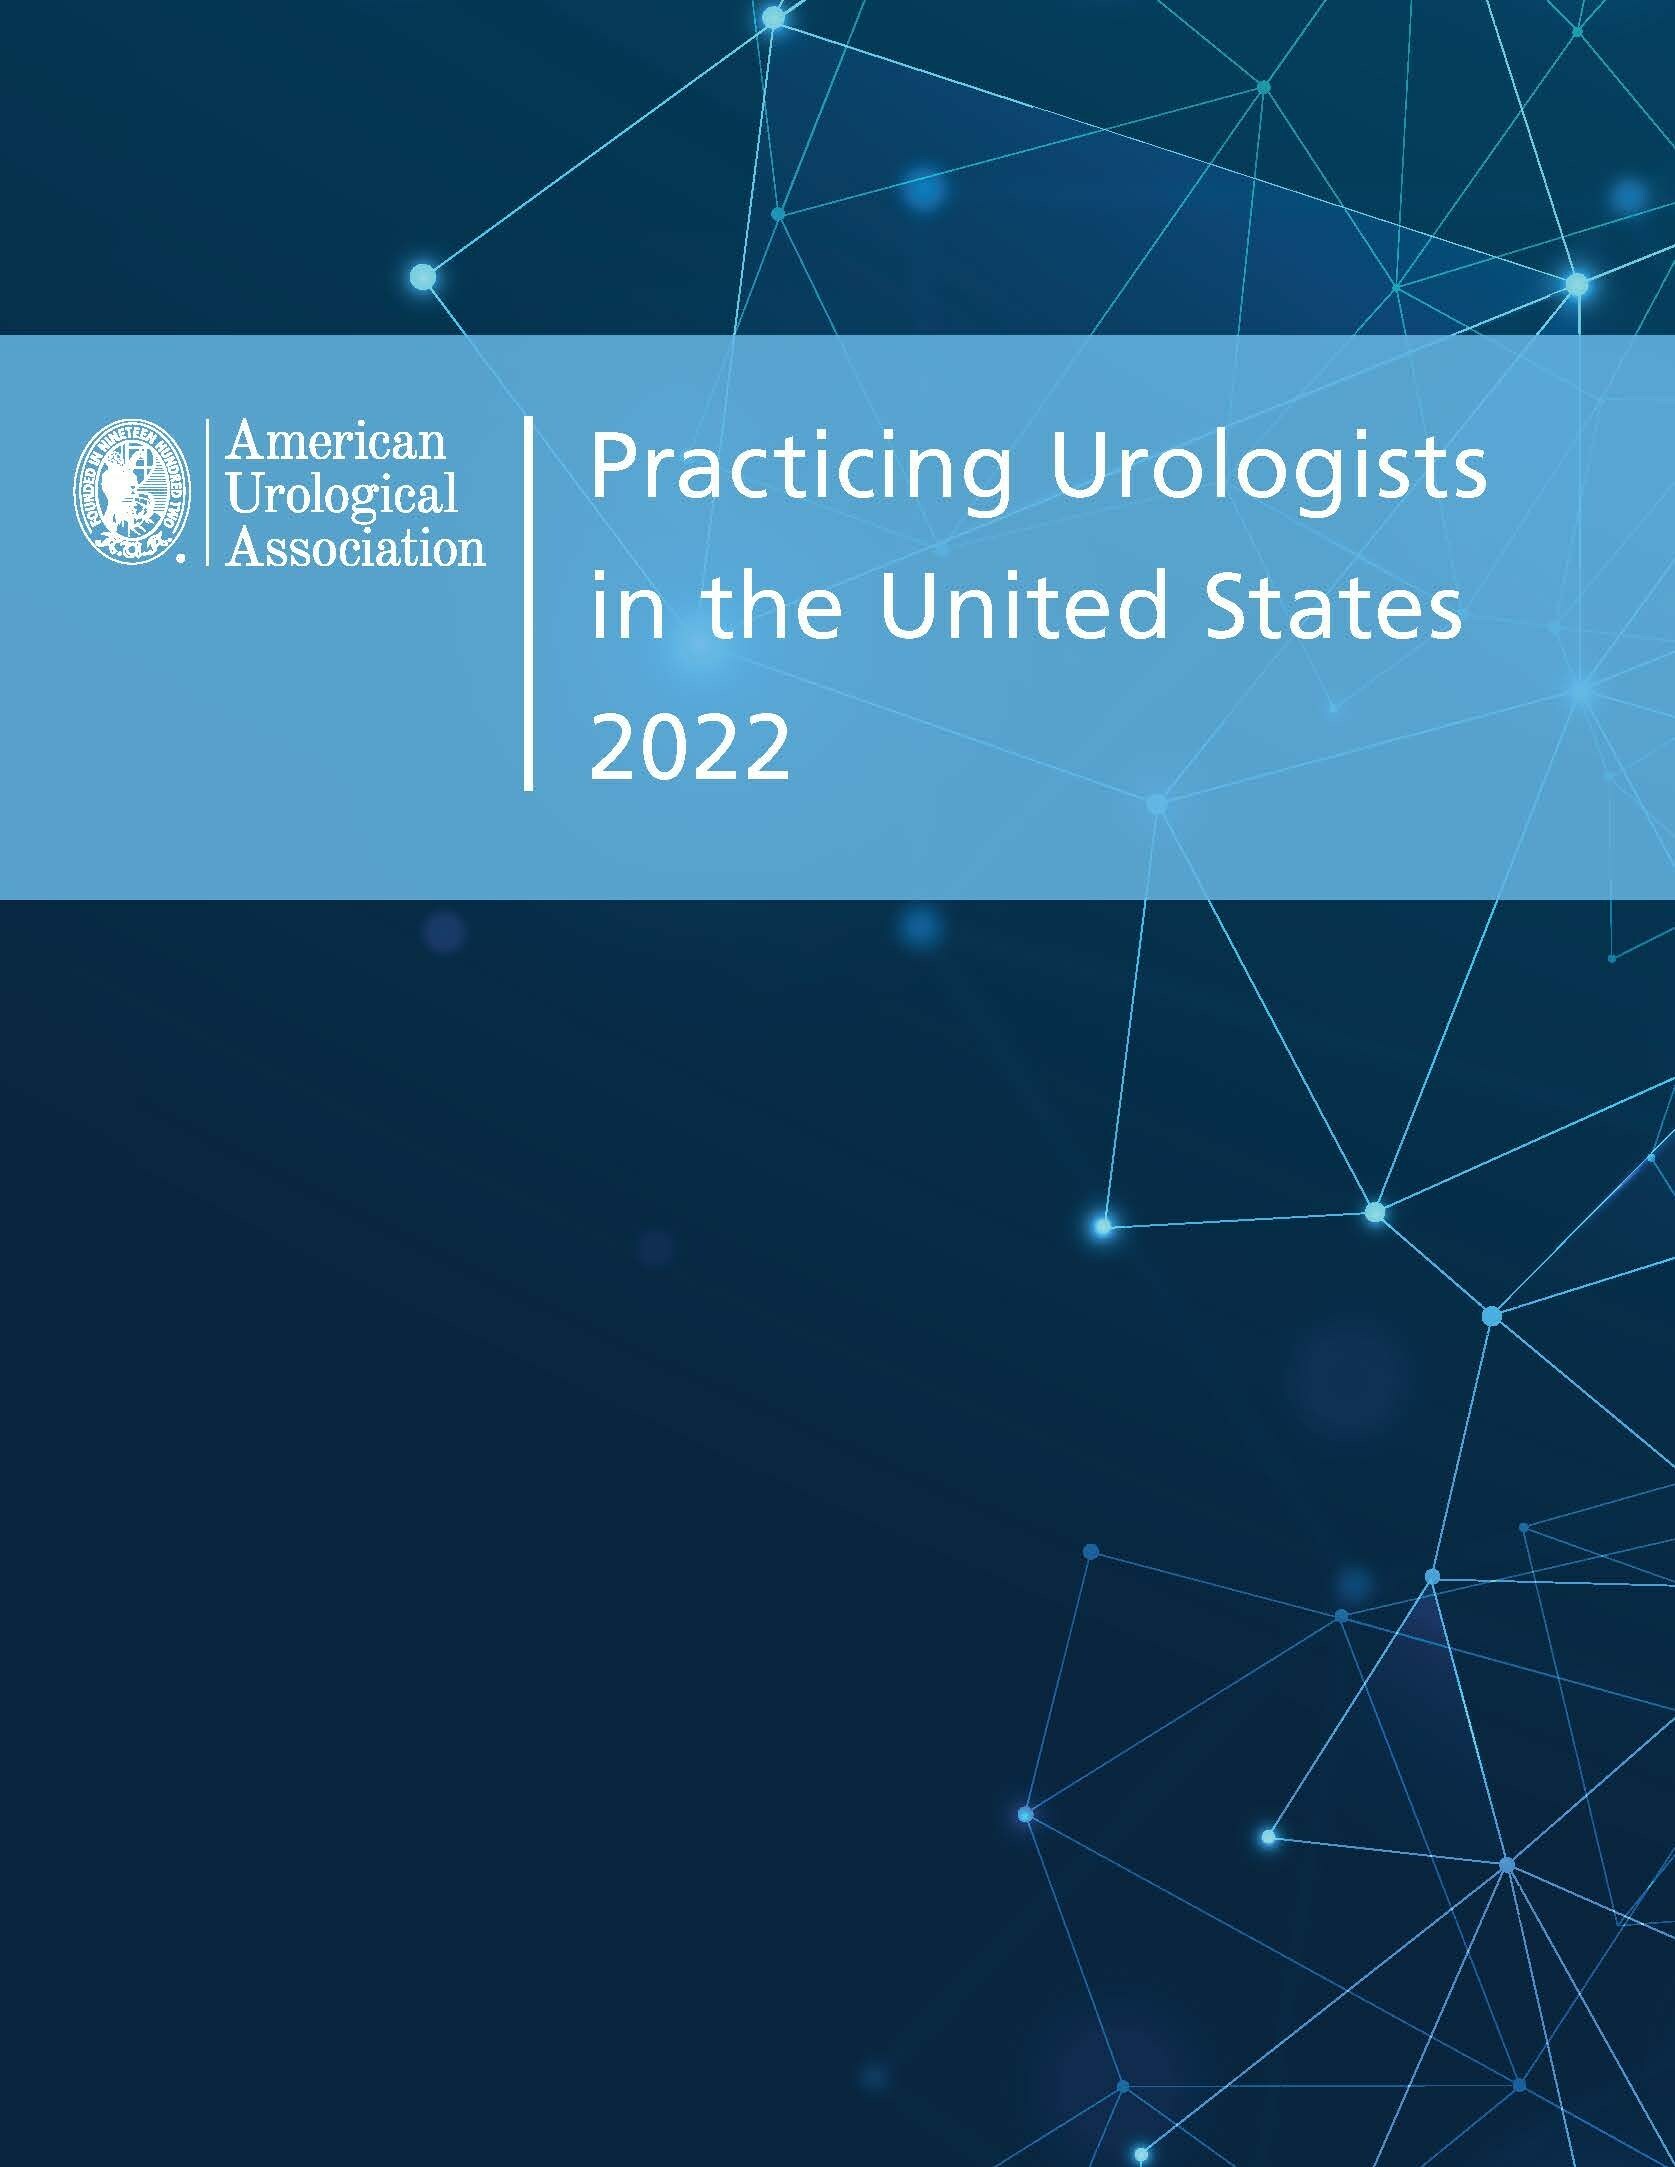 The AUA is pleased to release the 2022 Annual Census report, The State of the Urology Workforce and Practice in the United States.